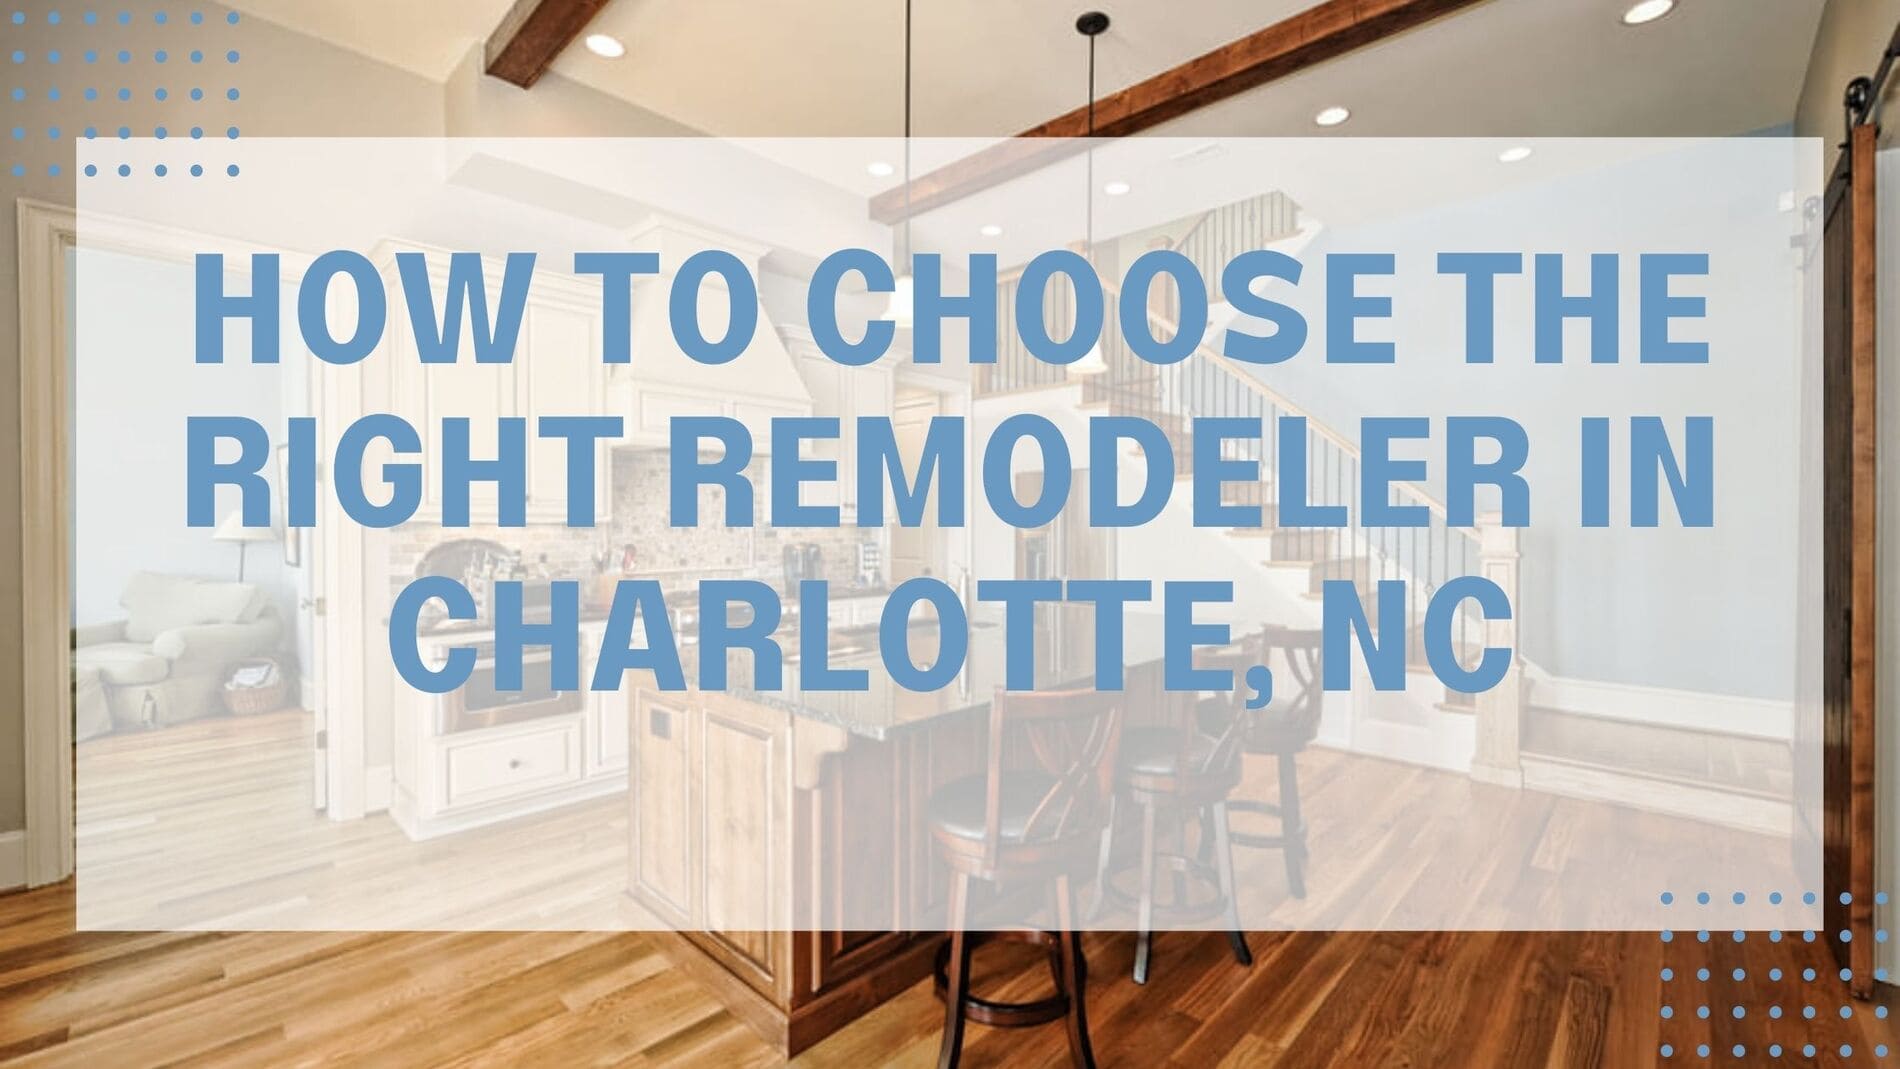 How to Choose the Right Remodeler in Charlotte, NC